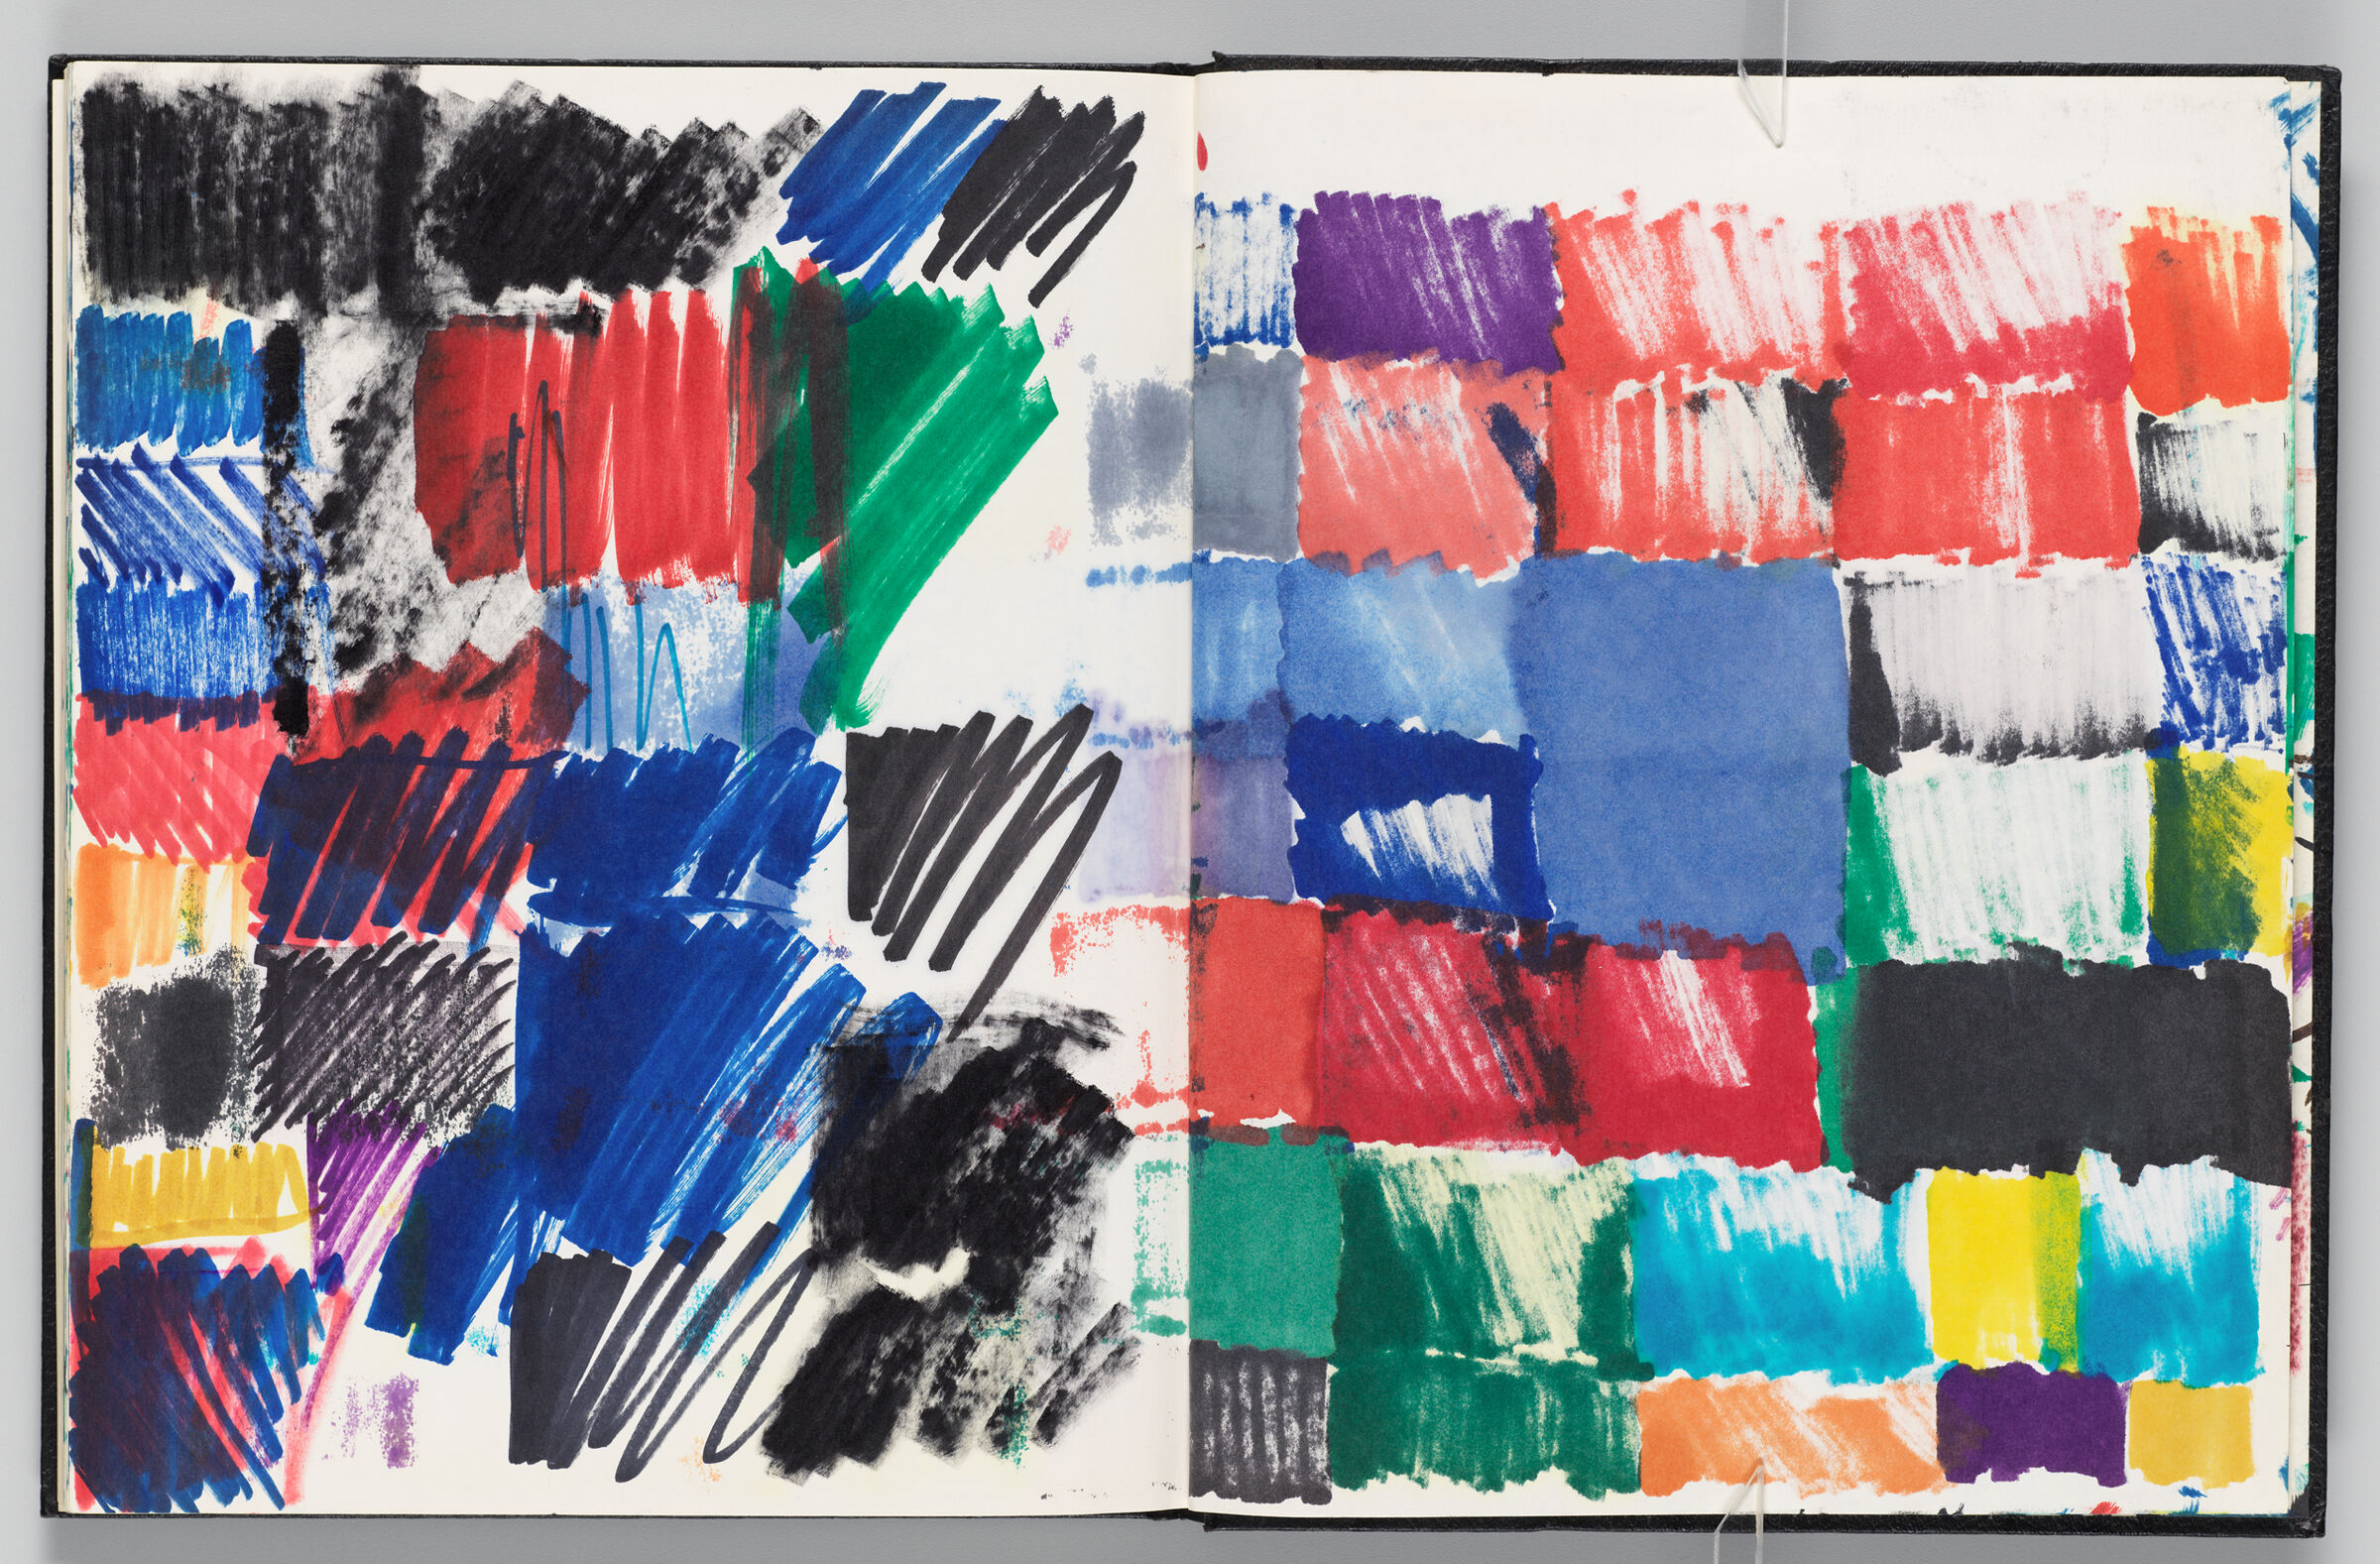 Untitled (Marker Test, Left Page); Untitled (Bleed-Through Of Following Page, Right Page)